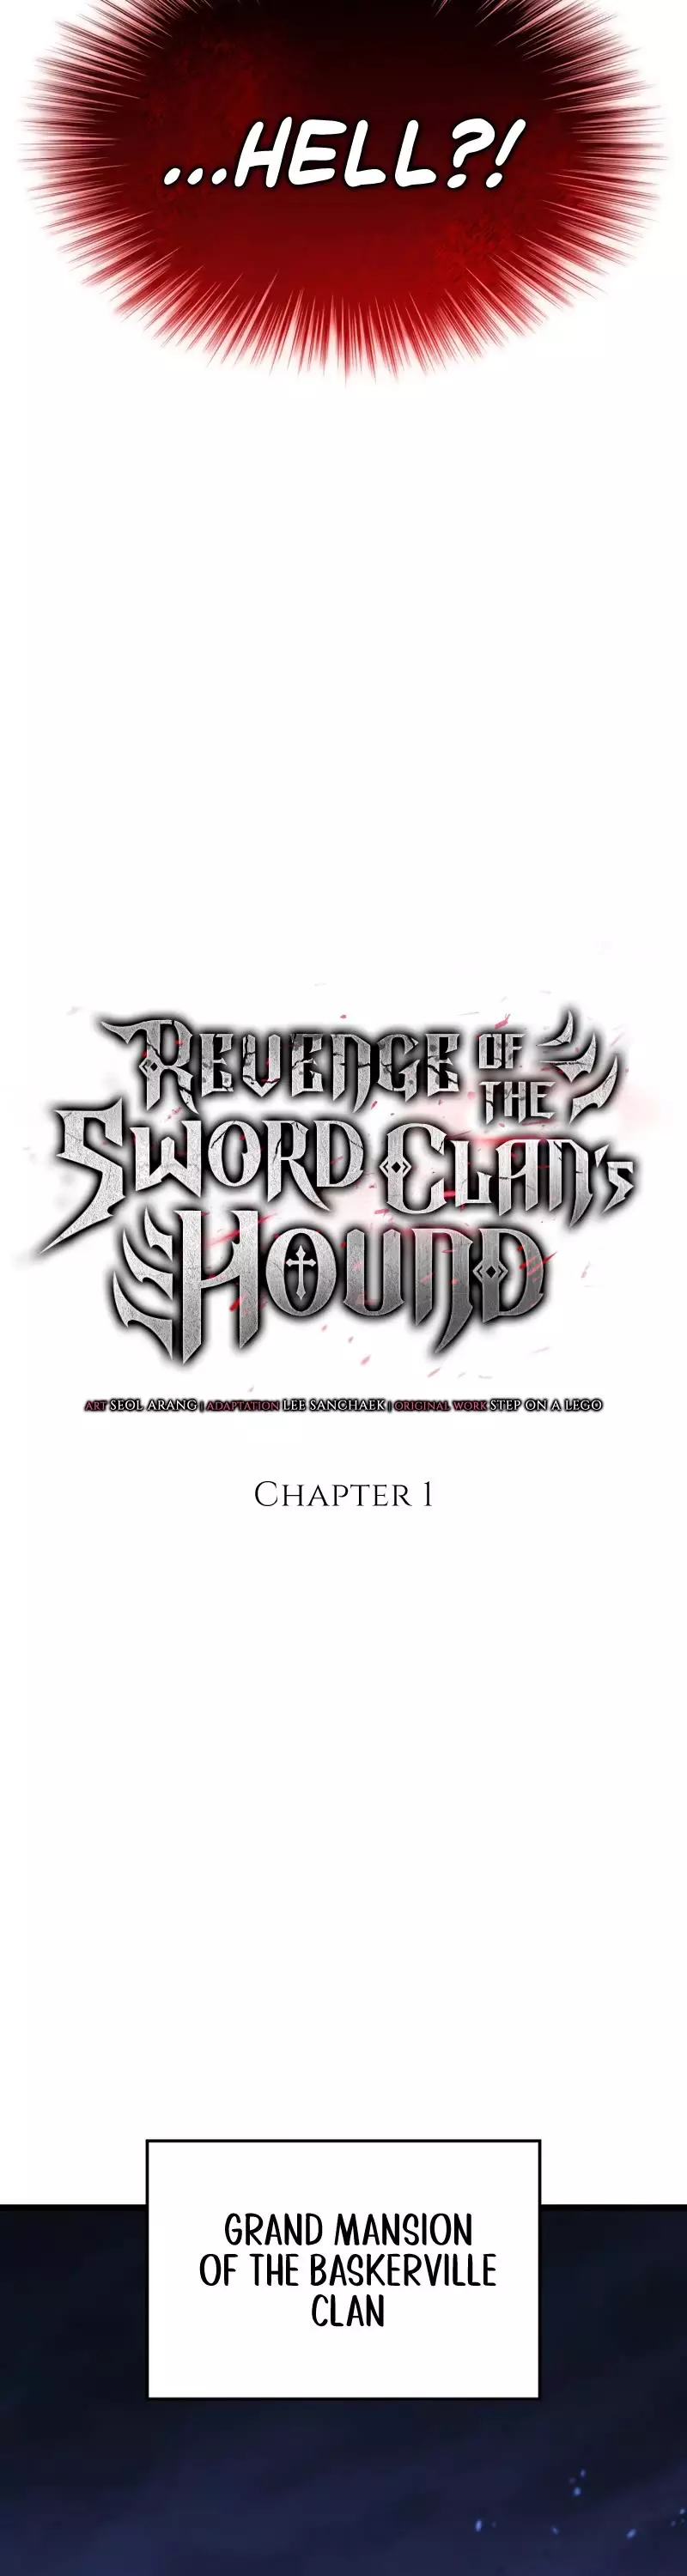 Revenge Of The Sword Clan's Hound - 1 page 11-2396643c